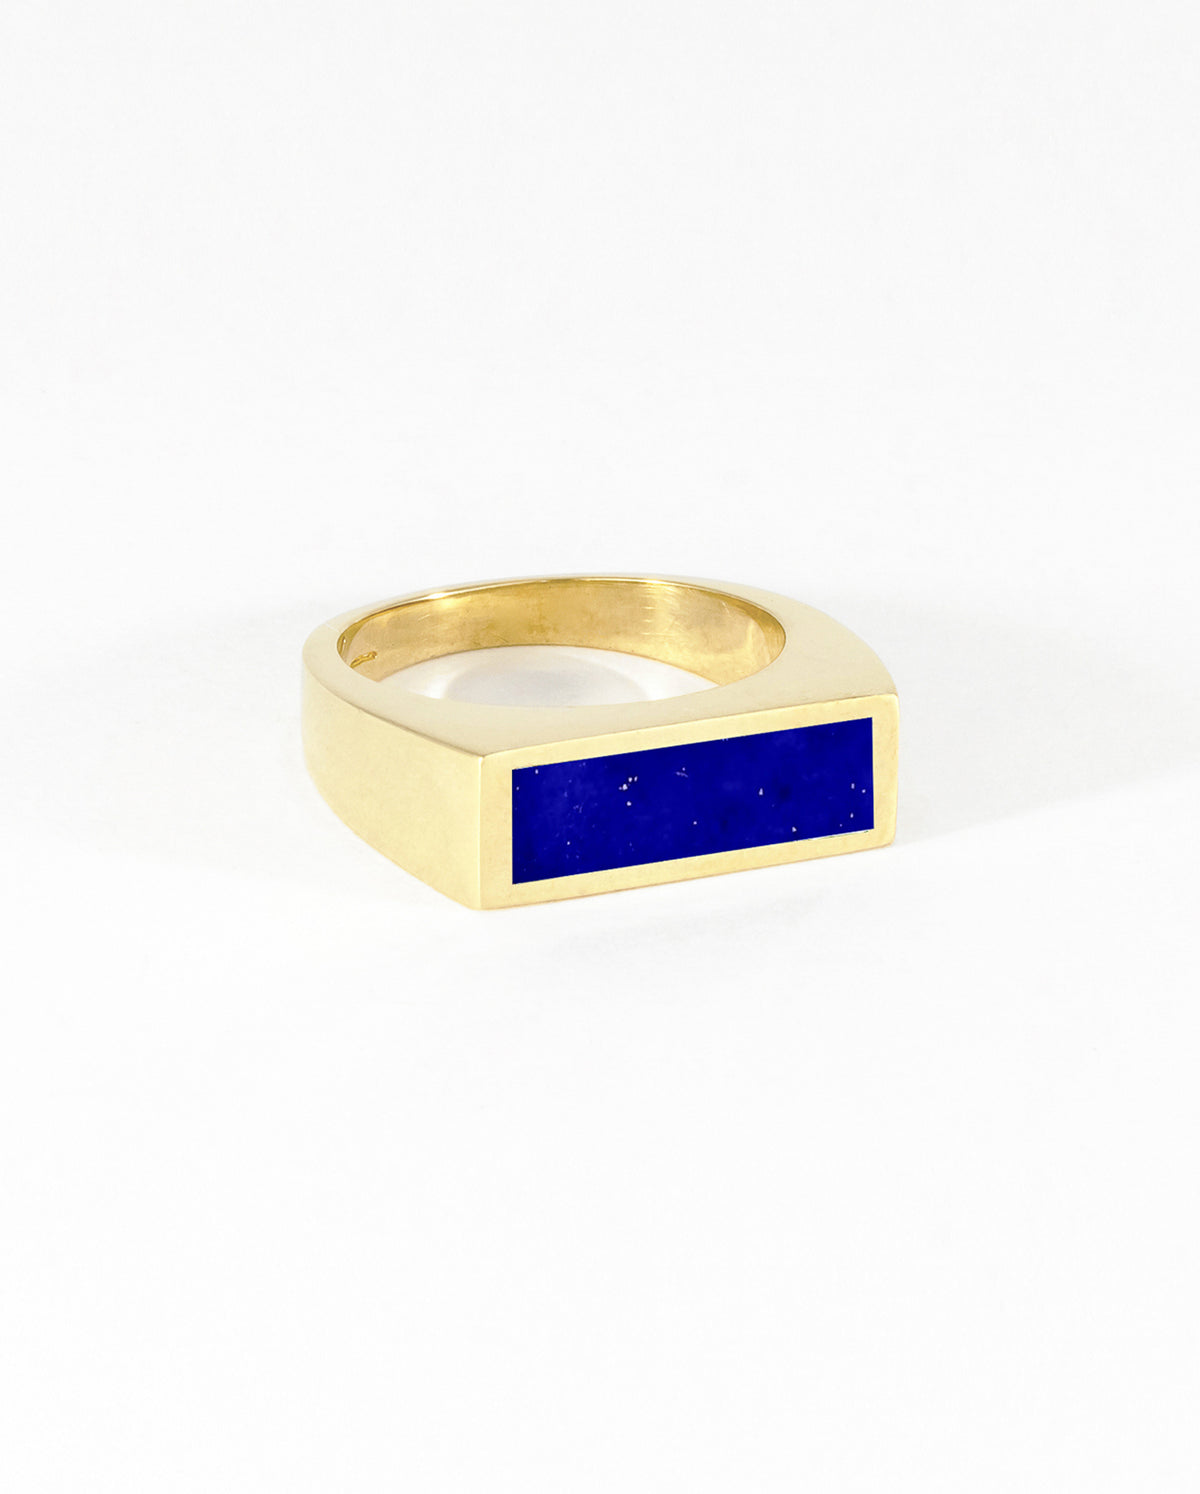 Small Signet Ring With Lapis Lazuli Inlay